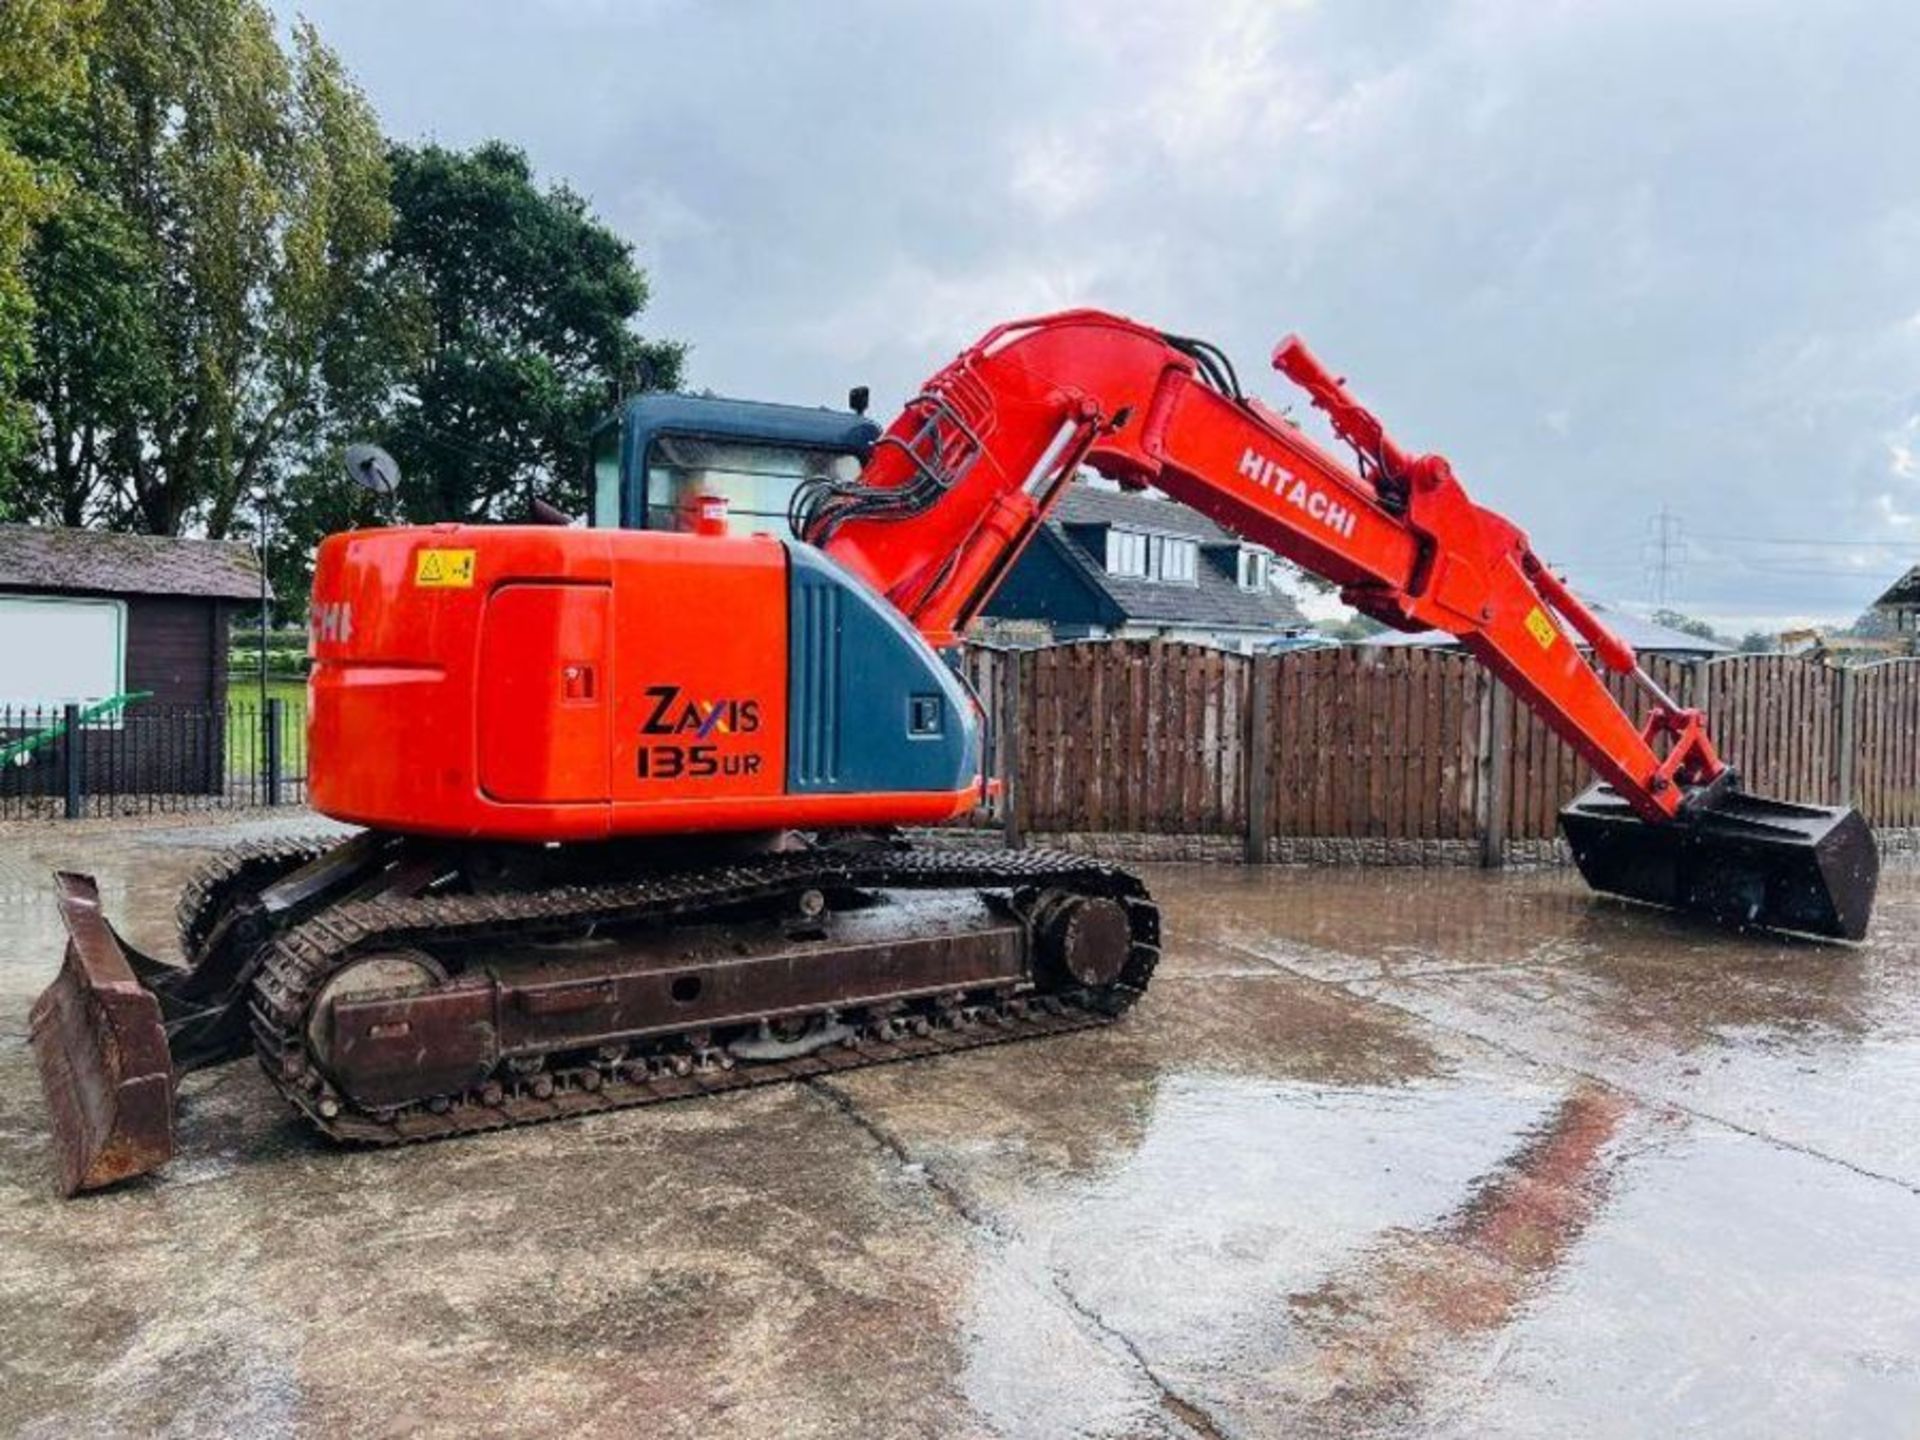 HITACHI ZAXIS 135UR TRACKED EXCAVATOR C/W FRONT BLADE - Image 10 of 17